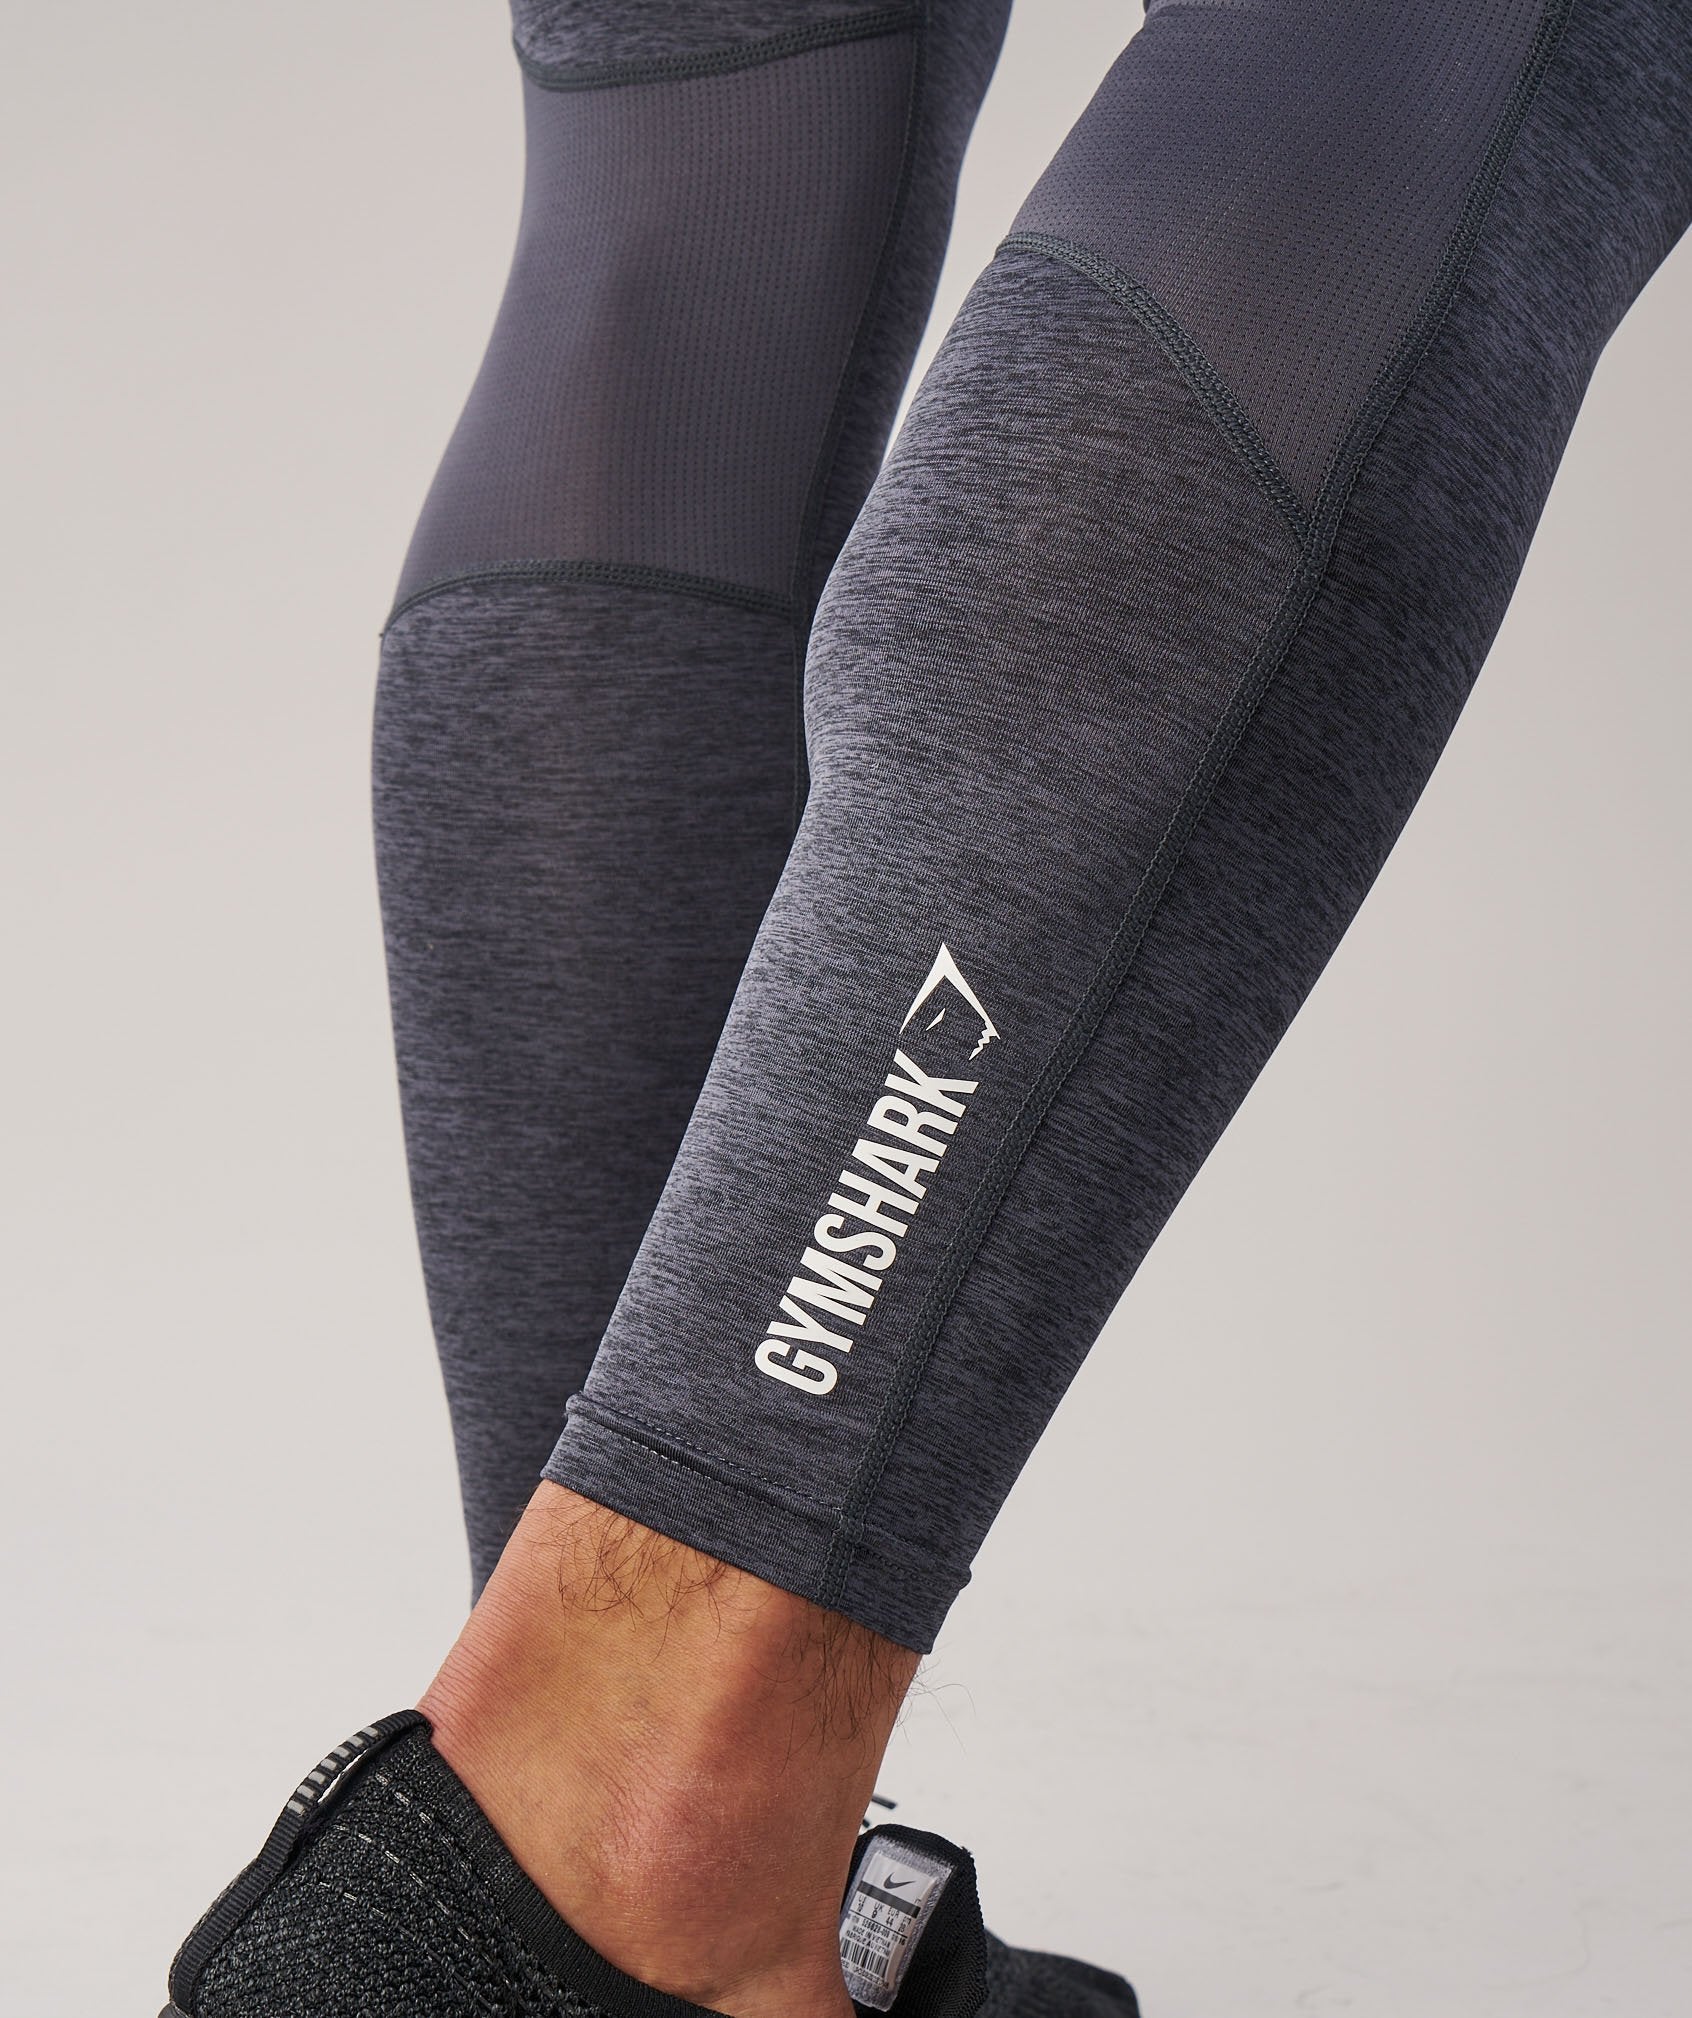 Element Baselayer Leggings in Charcoal Marl - view 6